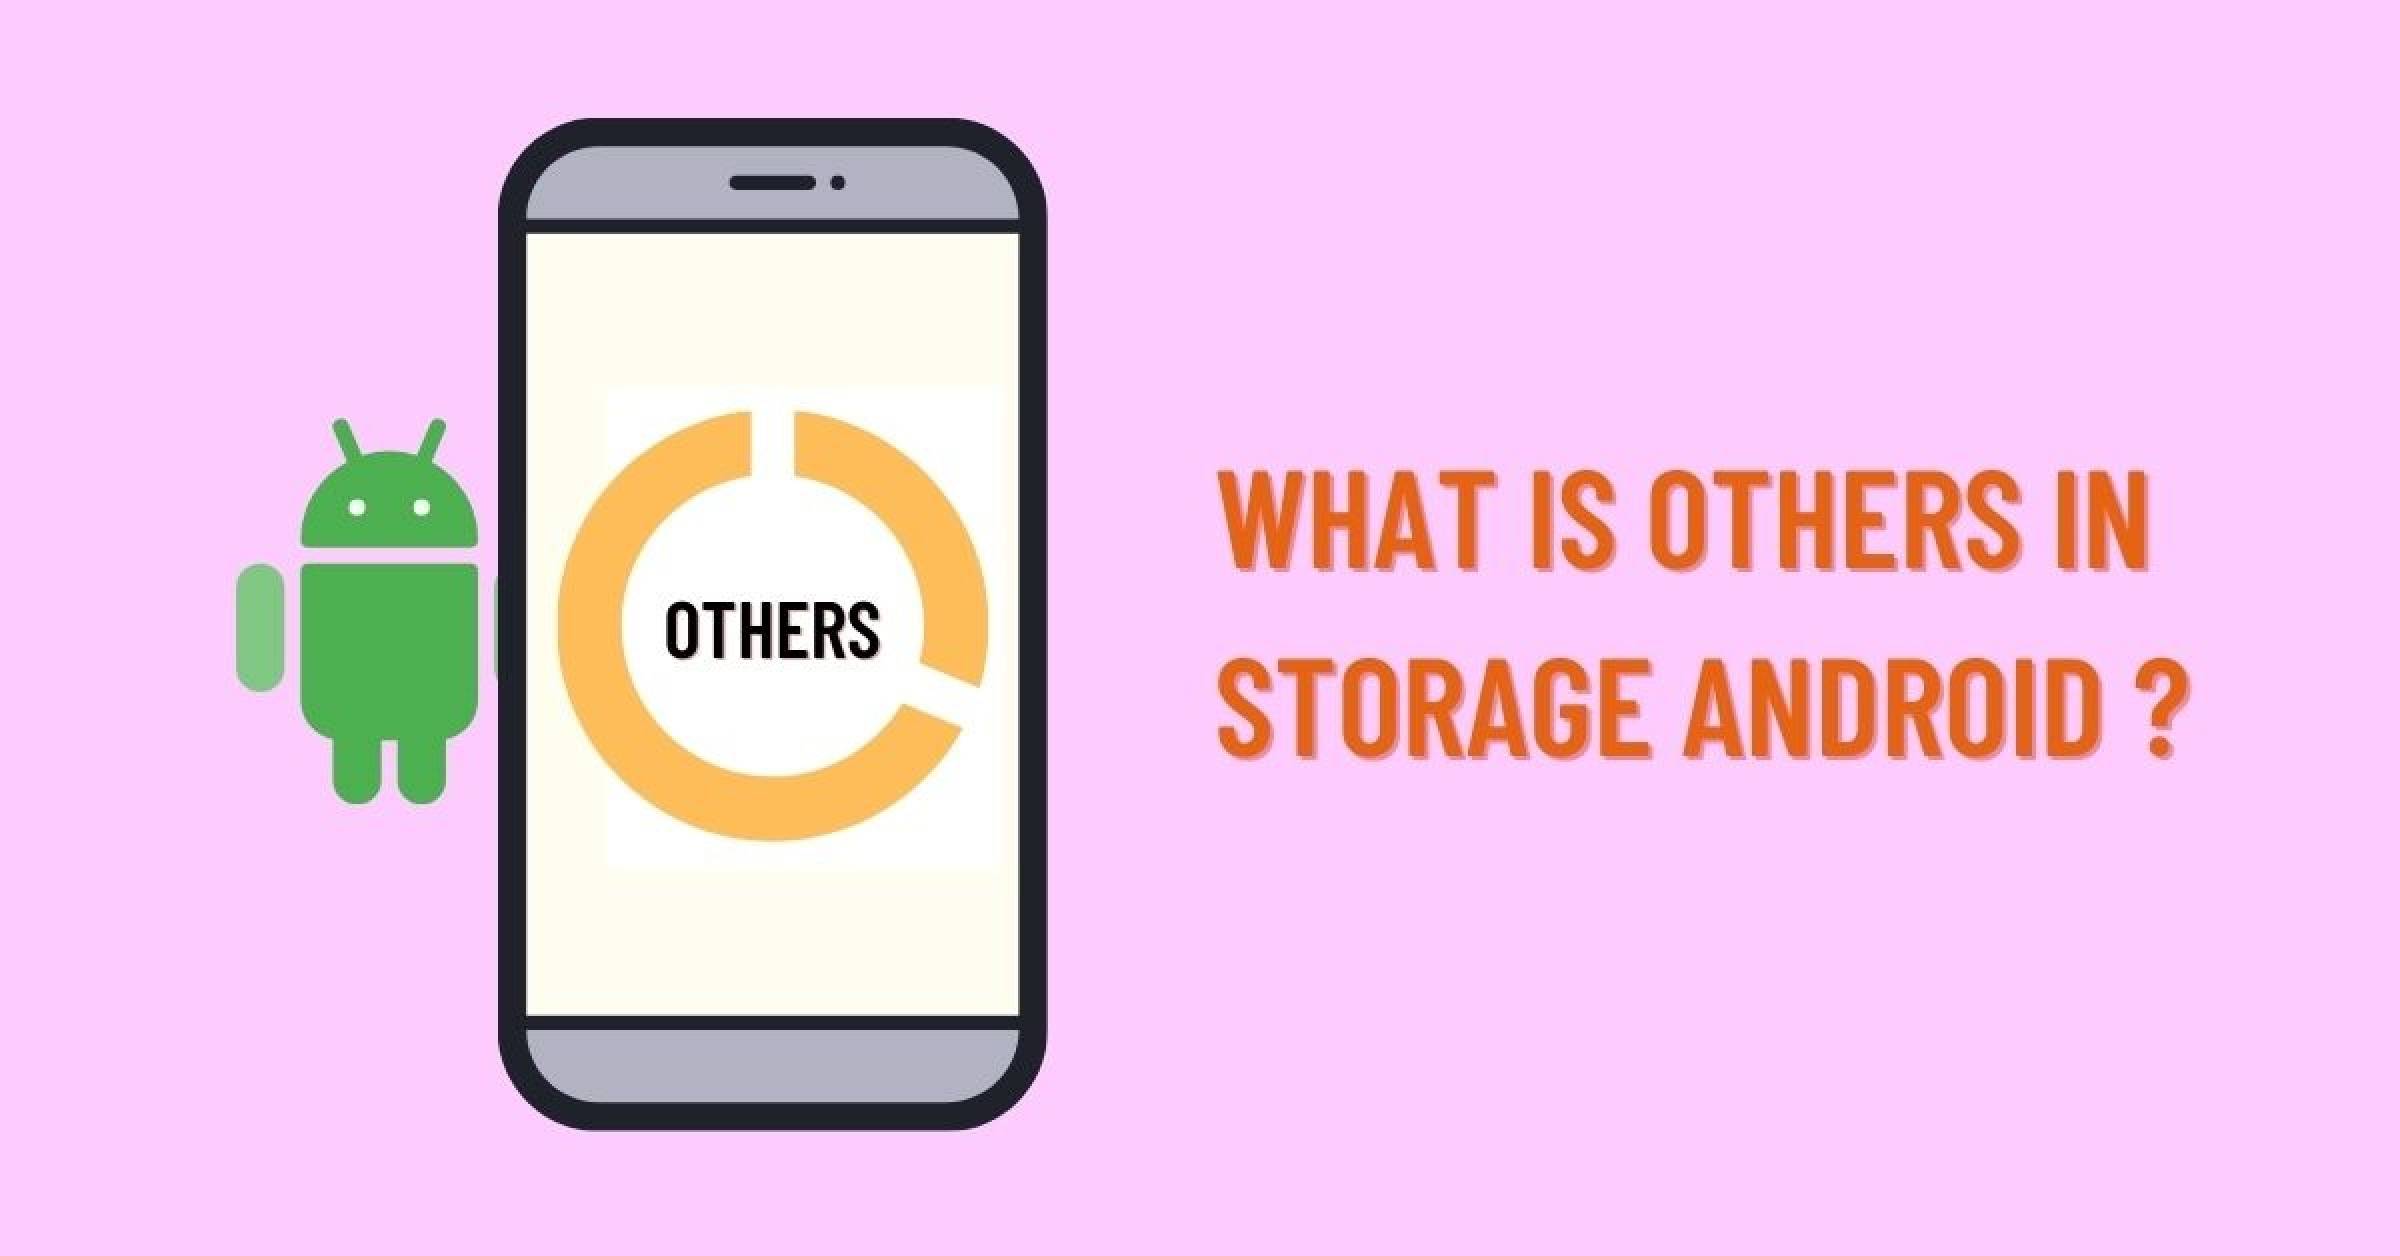 What is other in phone storage